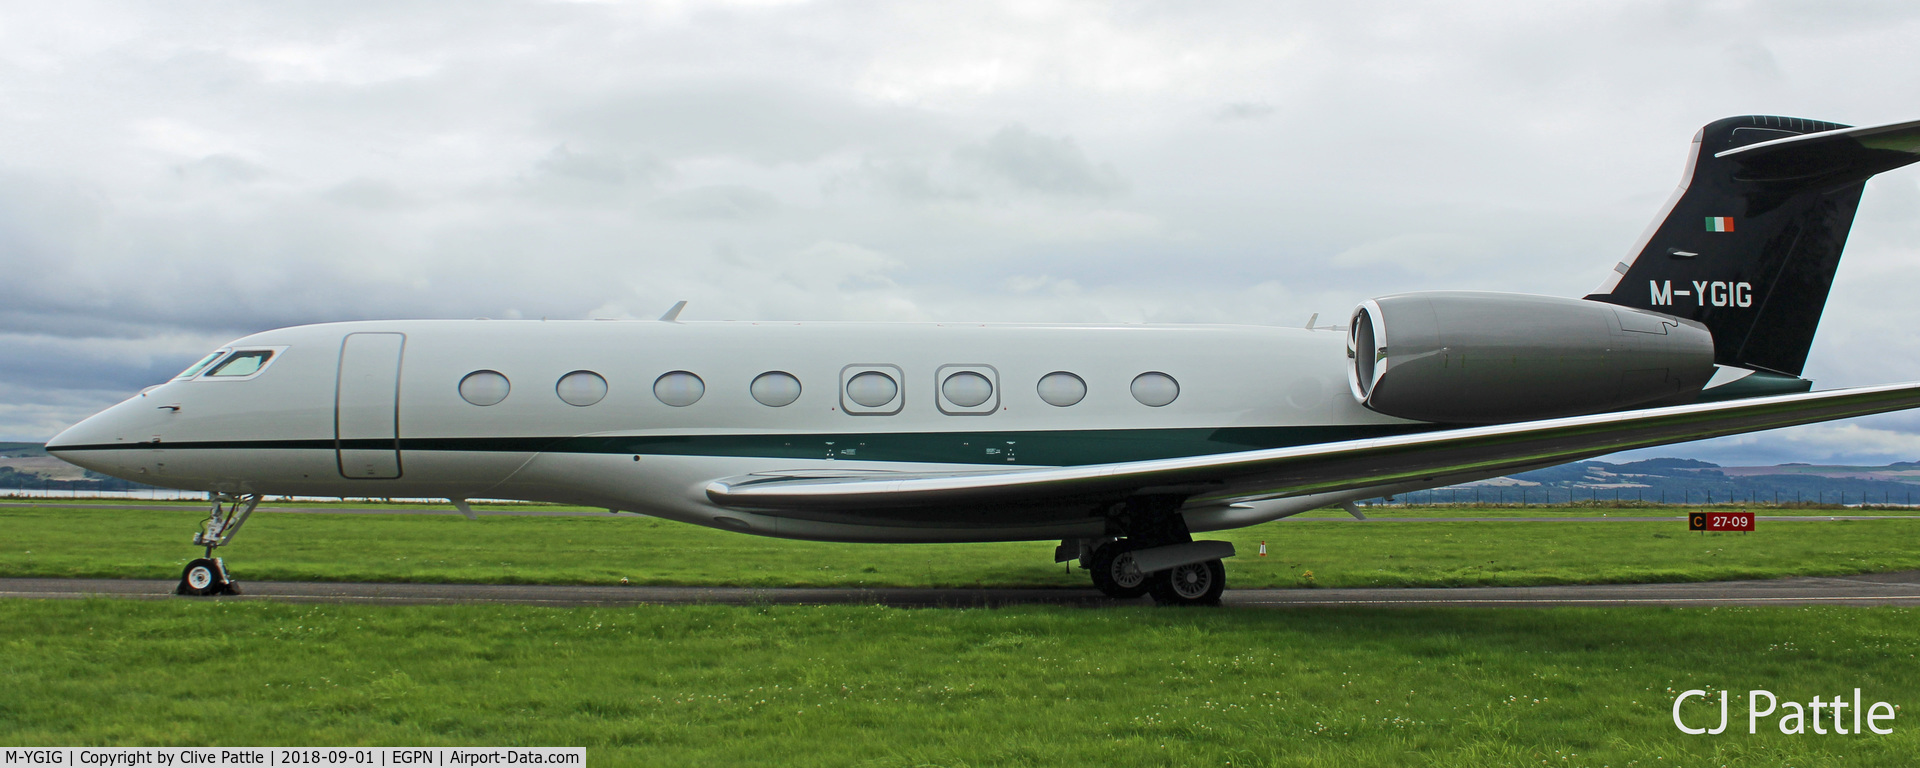 M-YGIG, 2017 Gulfstream G-VI (G650ER) C/N 6305, Parked on the 'Alpha' taxiway at Dundee